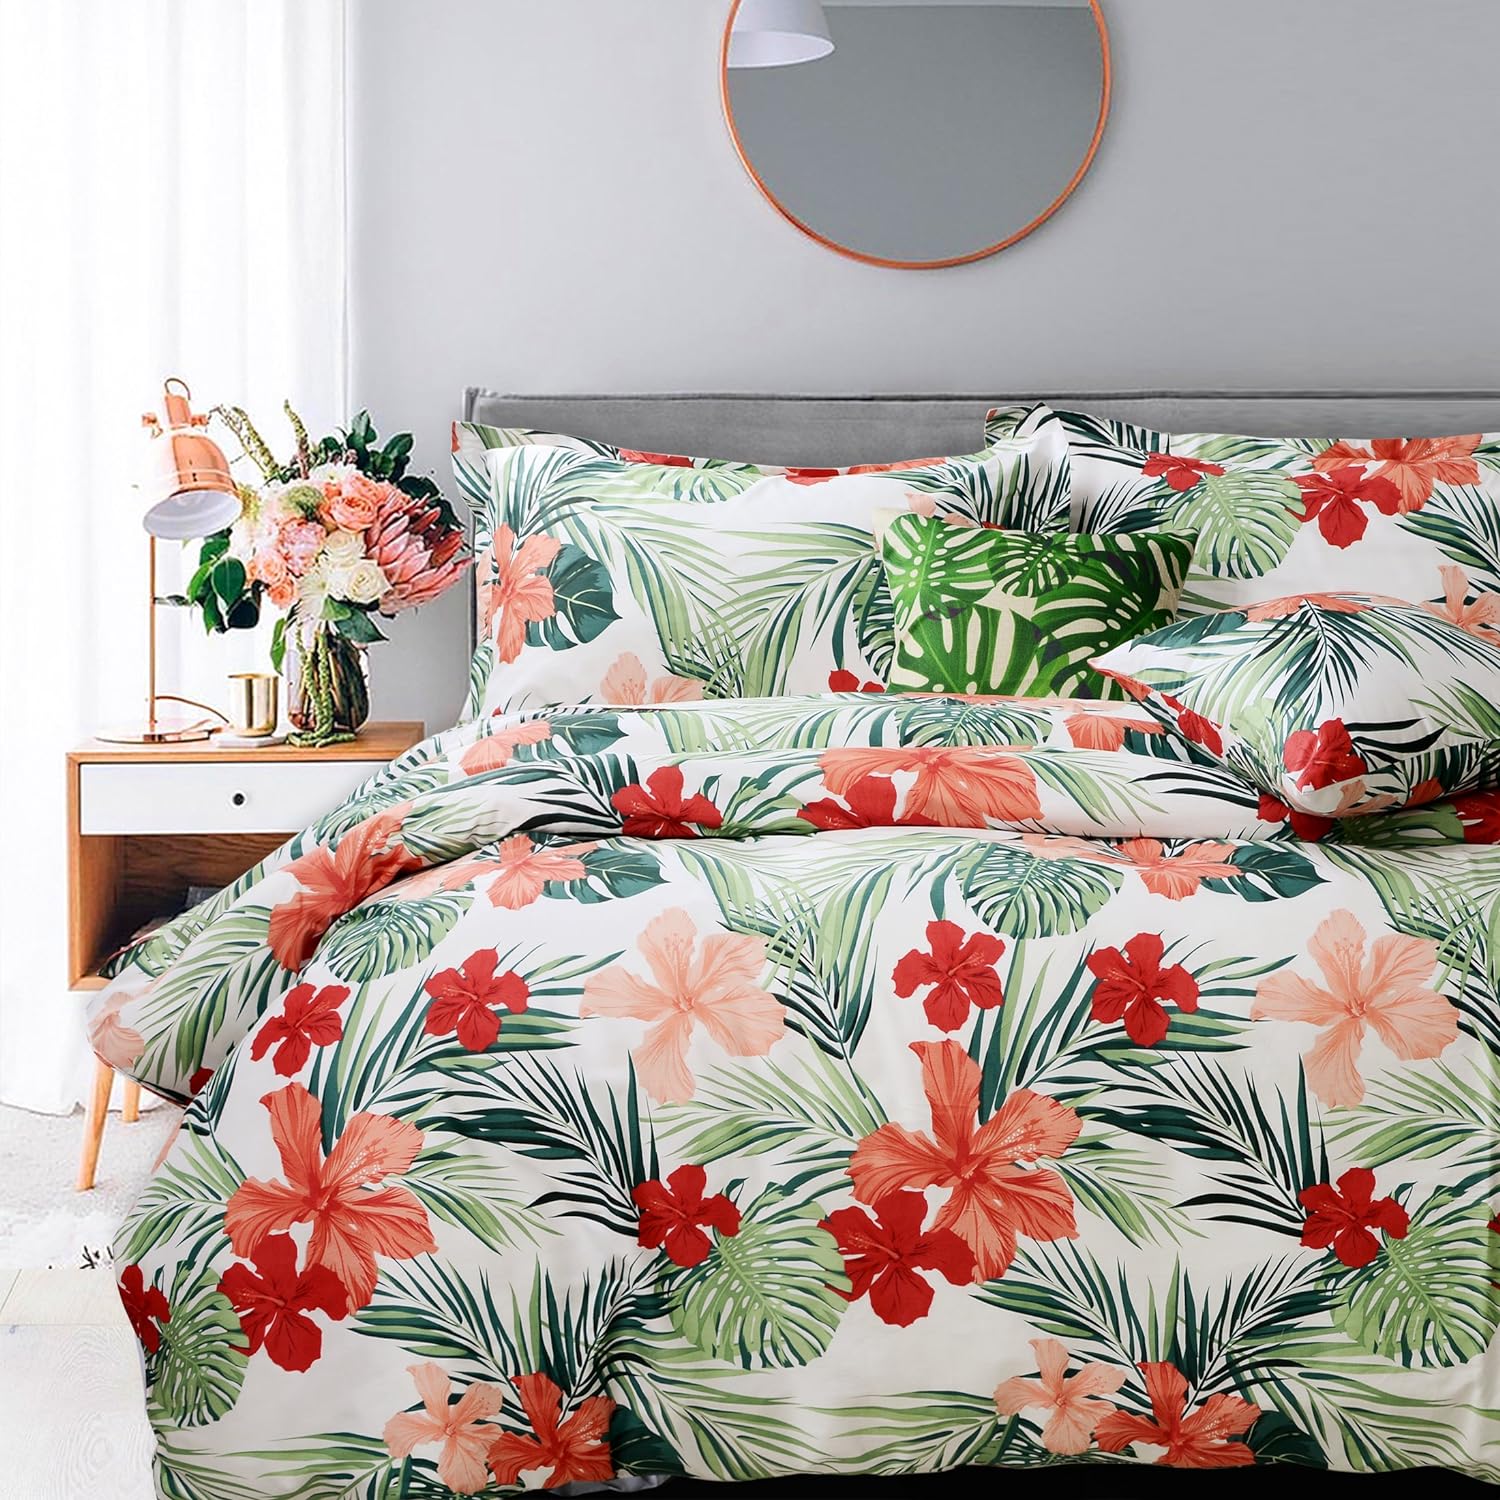 FADFAY Tropical Red Hibiscus Palm Leaves Duvet Cover Set Super Soft Summer Bedding 100% Cotton Soft with Hidden Zipper Closure Queen Size 3-Pieces